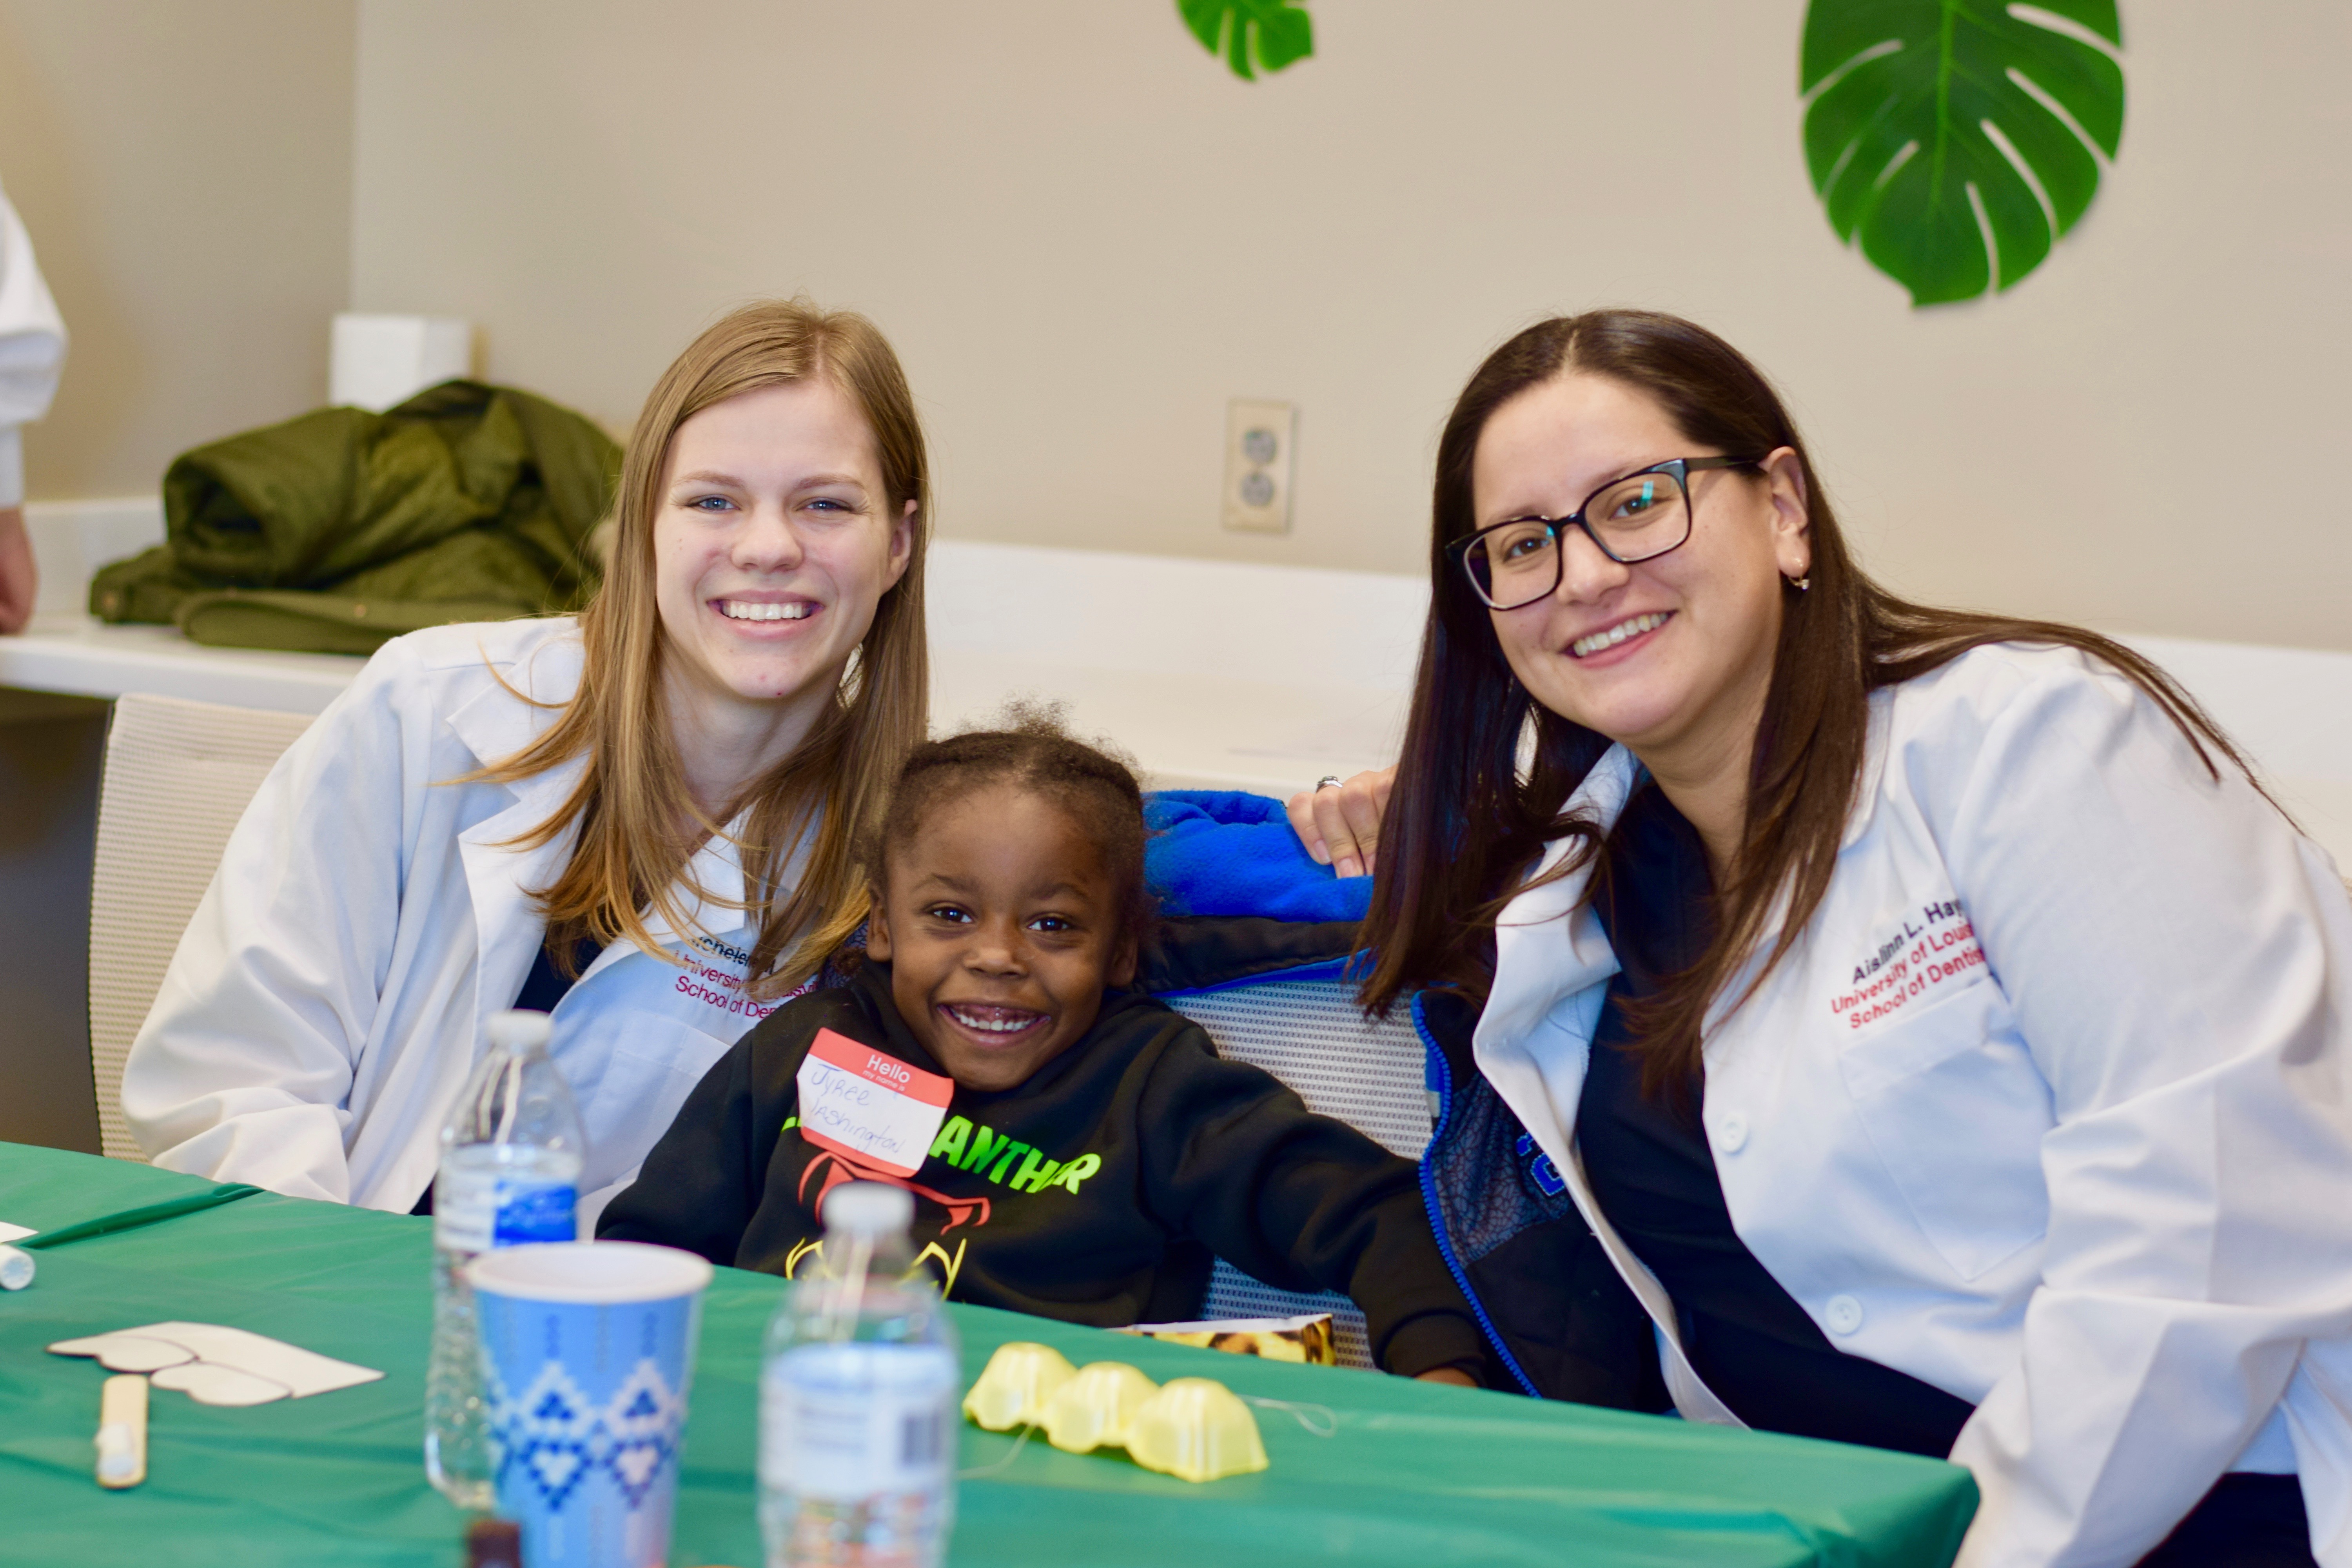 The Shop with a Dentist program pairs UofL dental students with underserved elementary students.